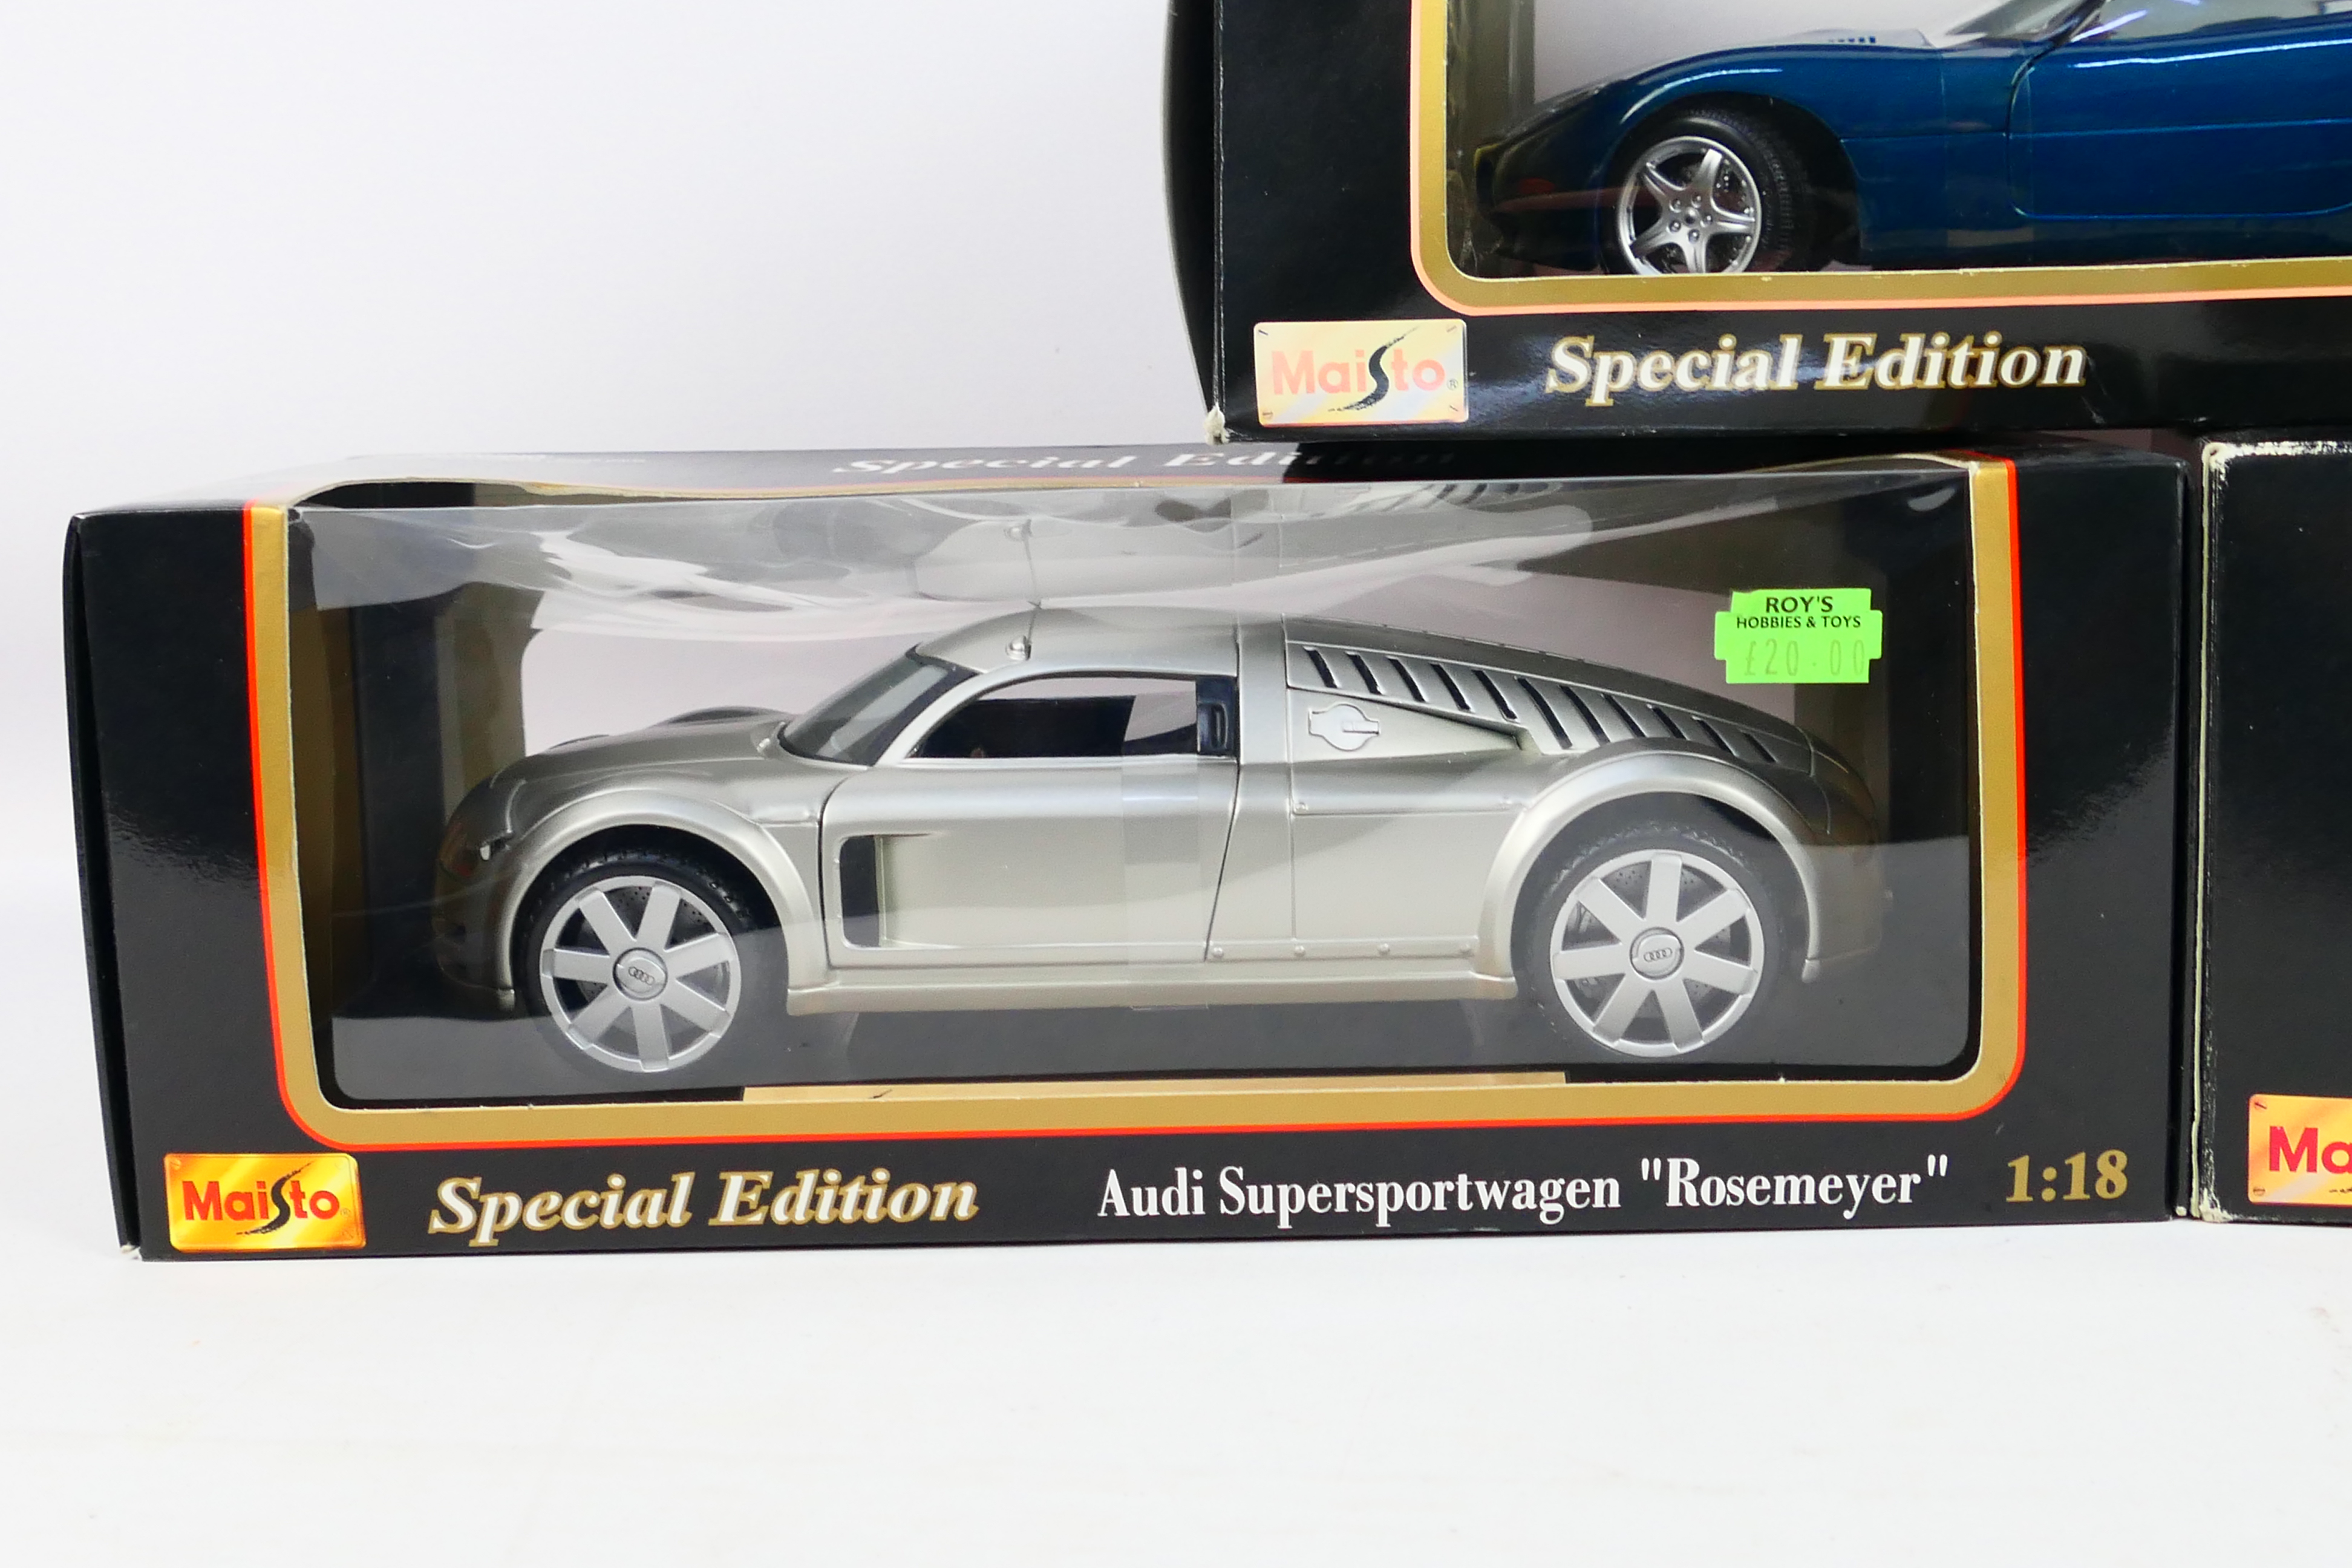 Maisto - Three boxed 1:18 scale Maisto 'Special Edition' diecast model cars. - Image 2 of 4